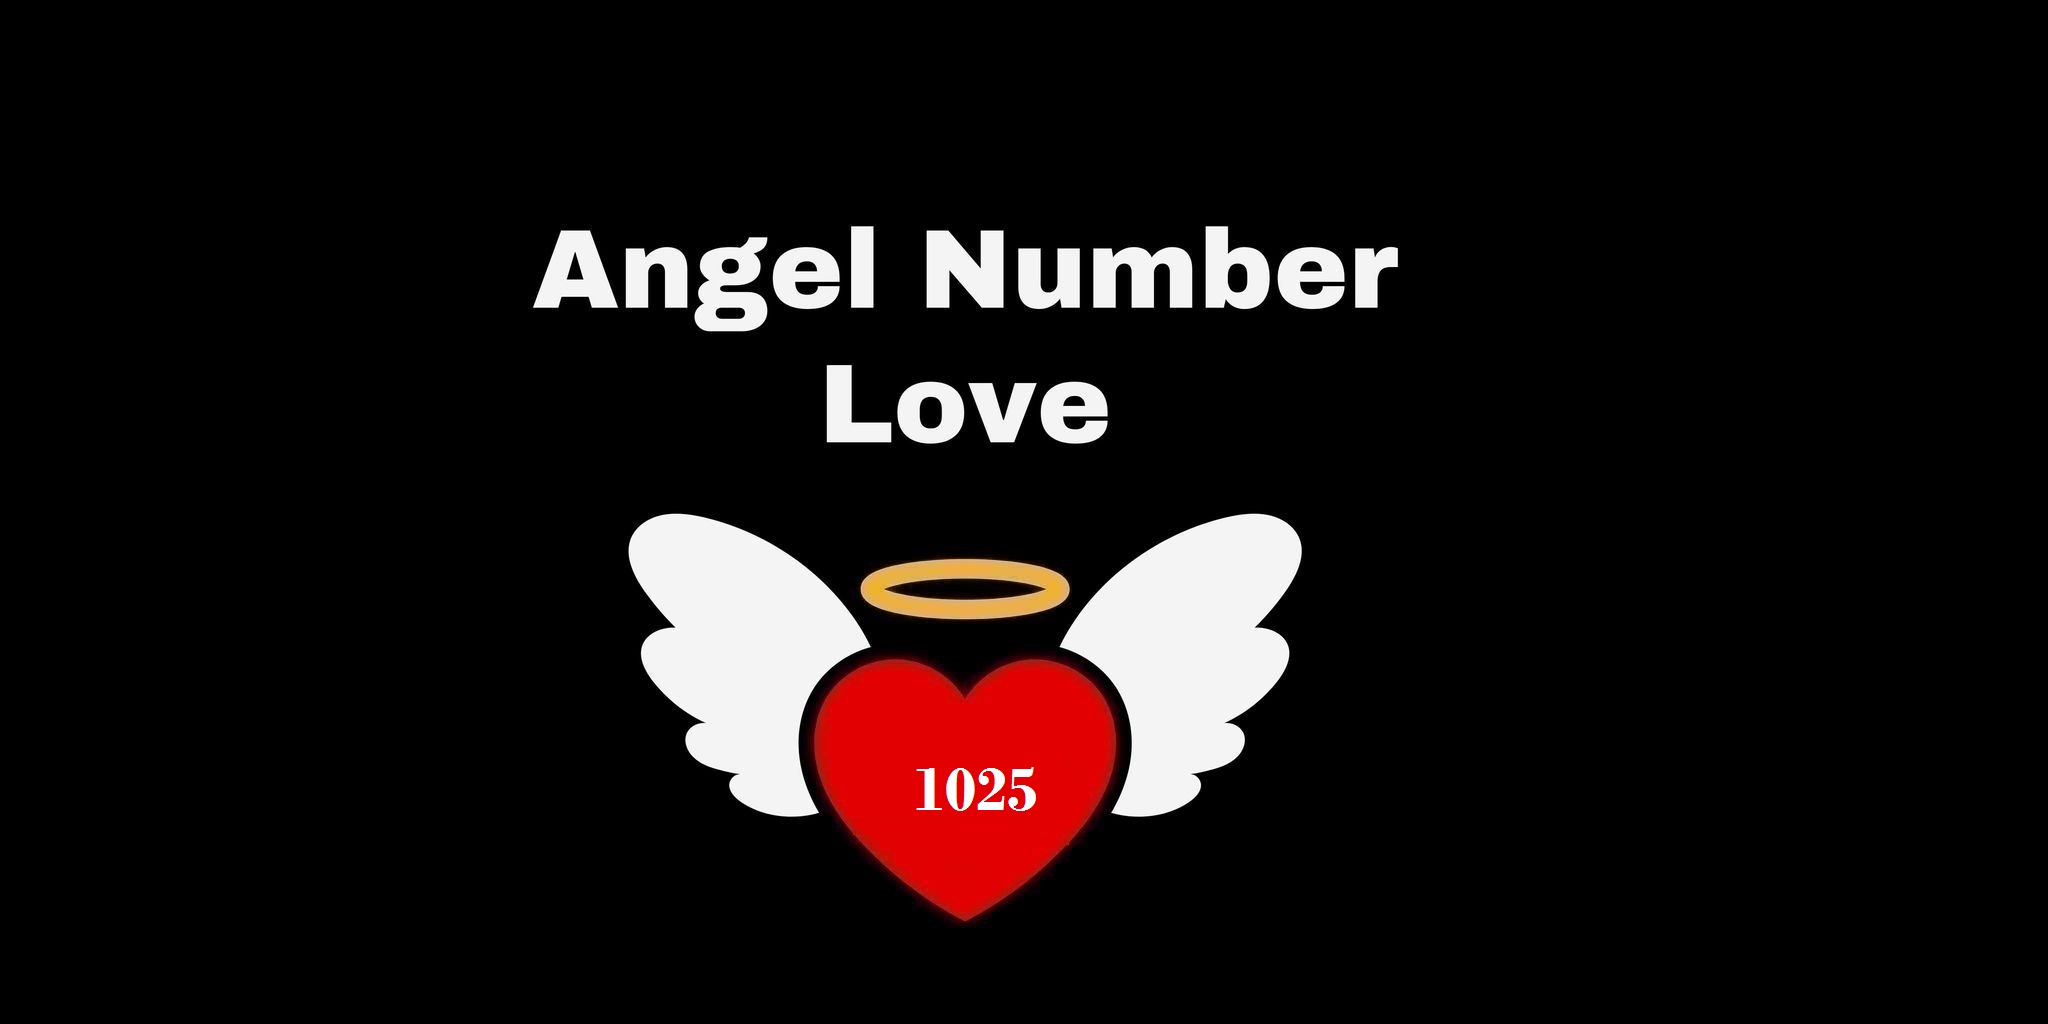 1025 Angel Number Meaning In Love